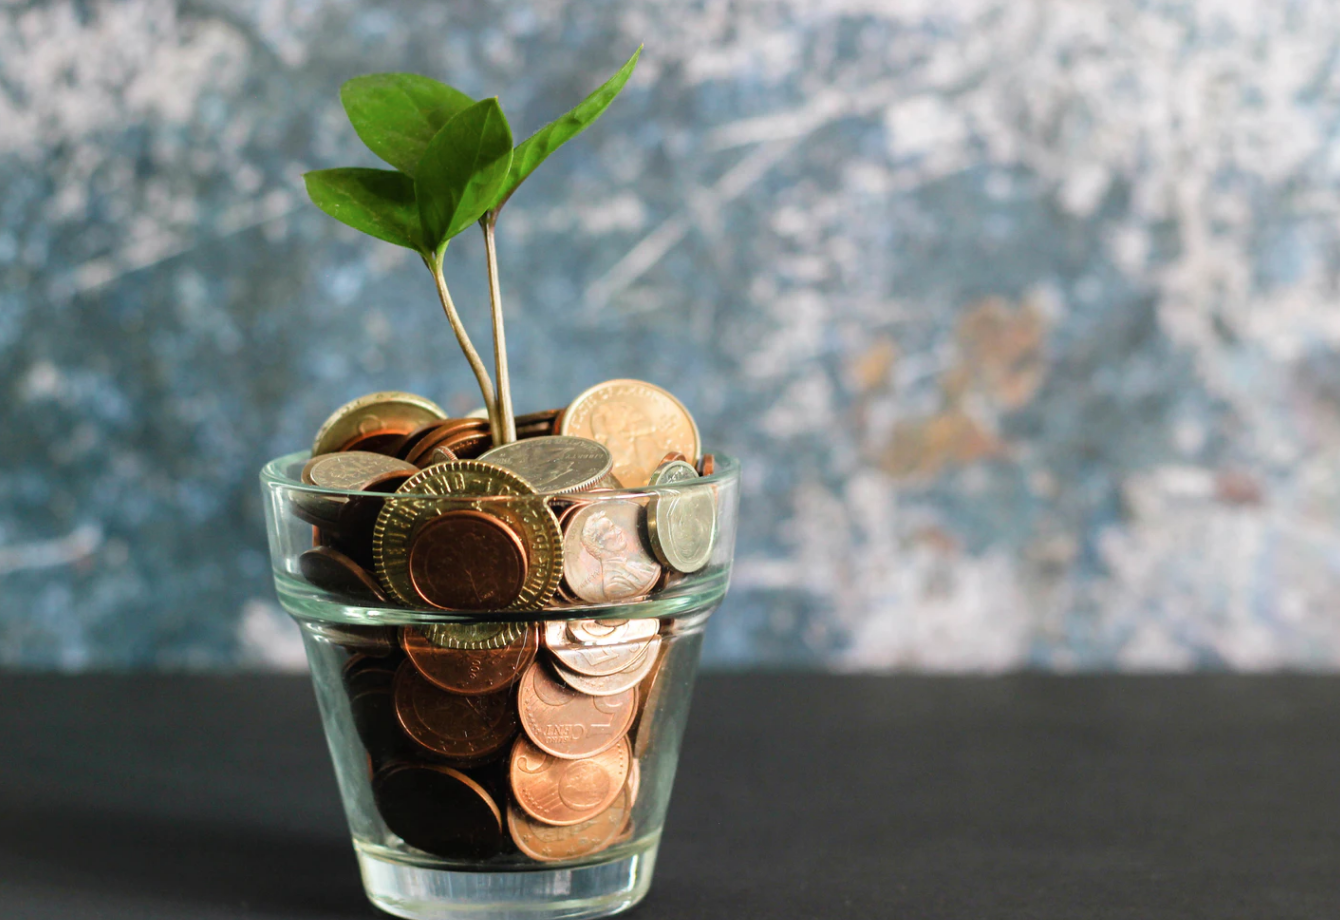 coins in cup with plant, money-saving guide